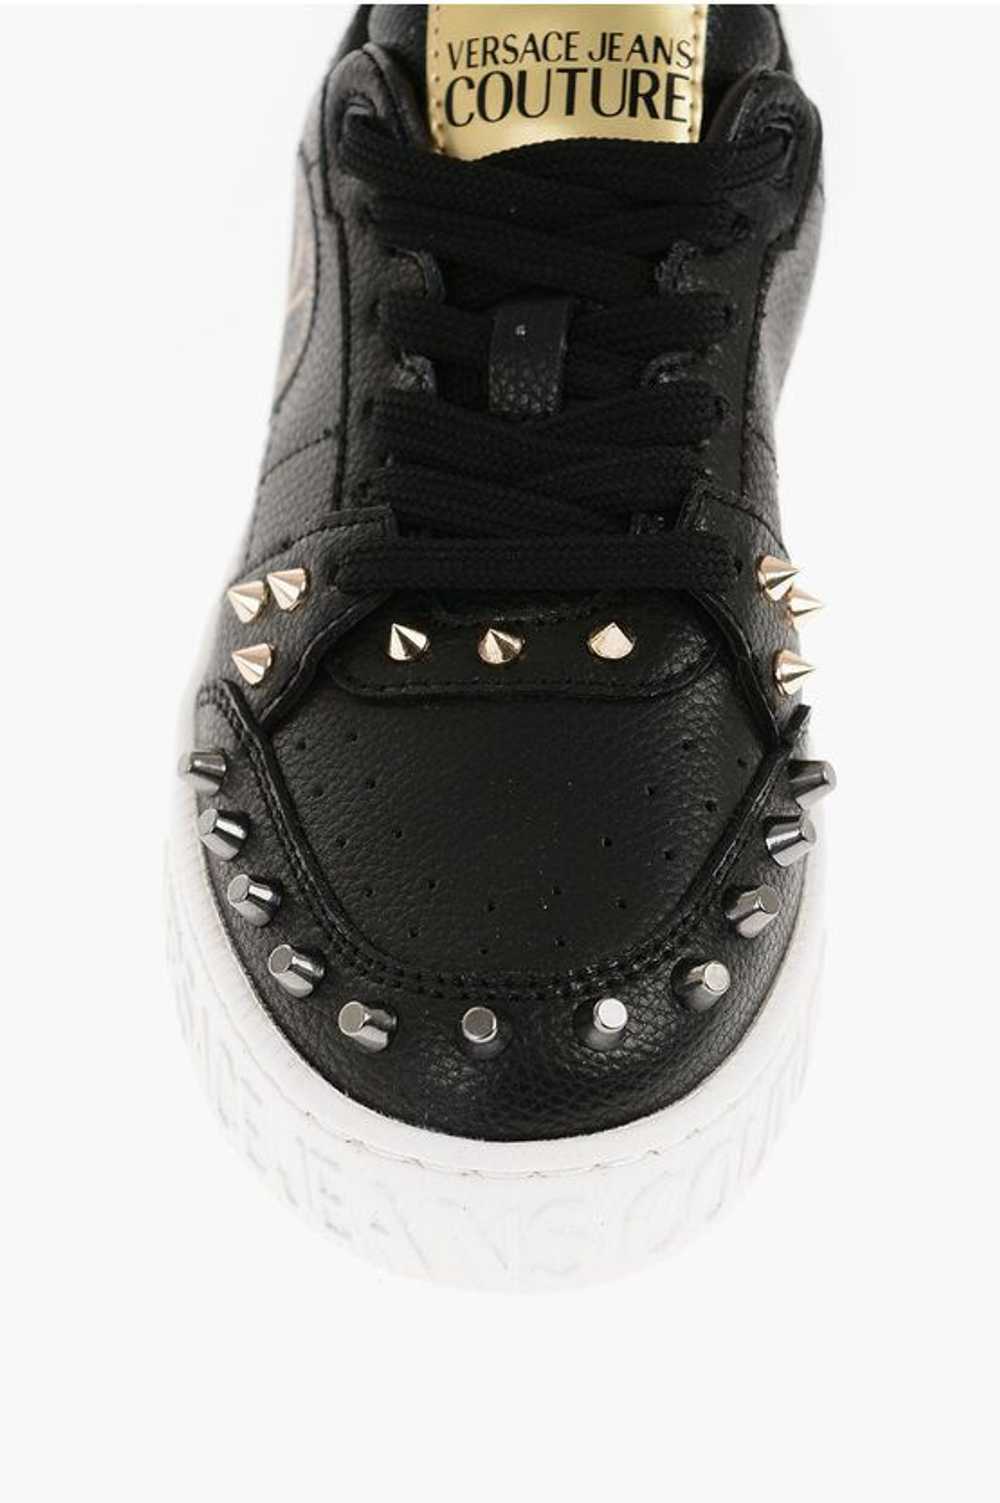 Versace og1mm0524 Leather Court Sneakers in Black - image 4